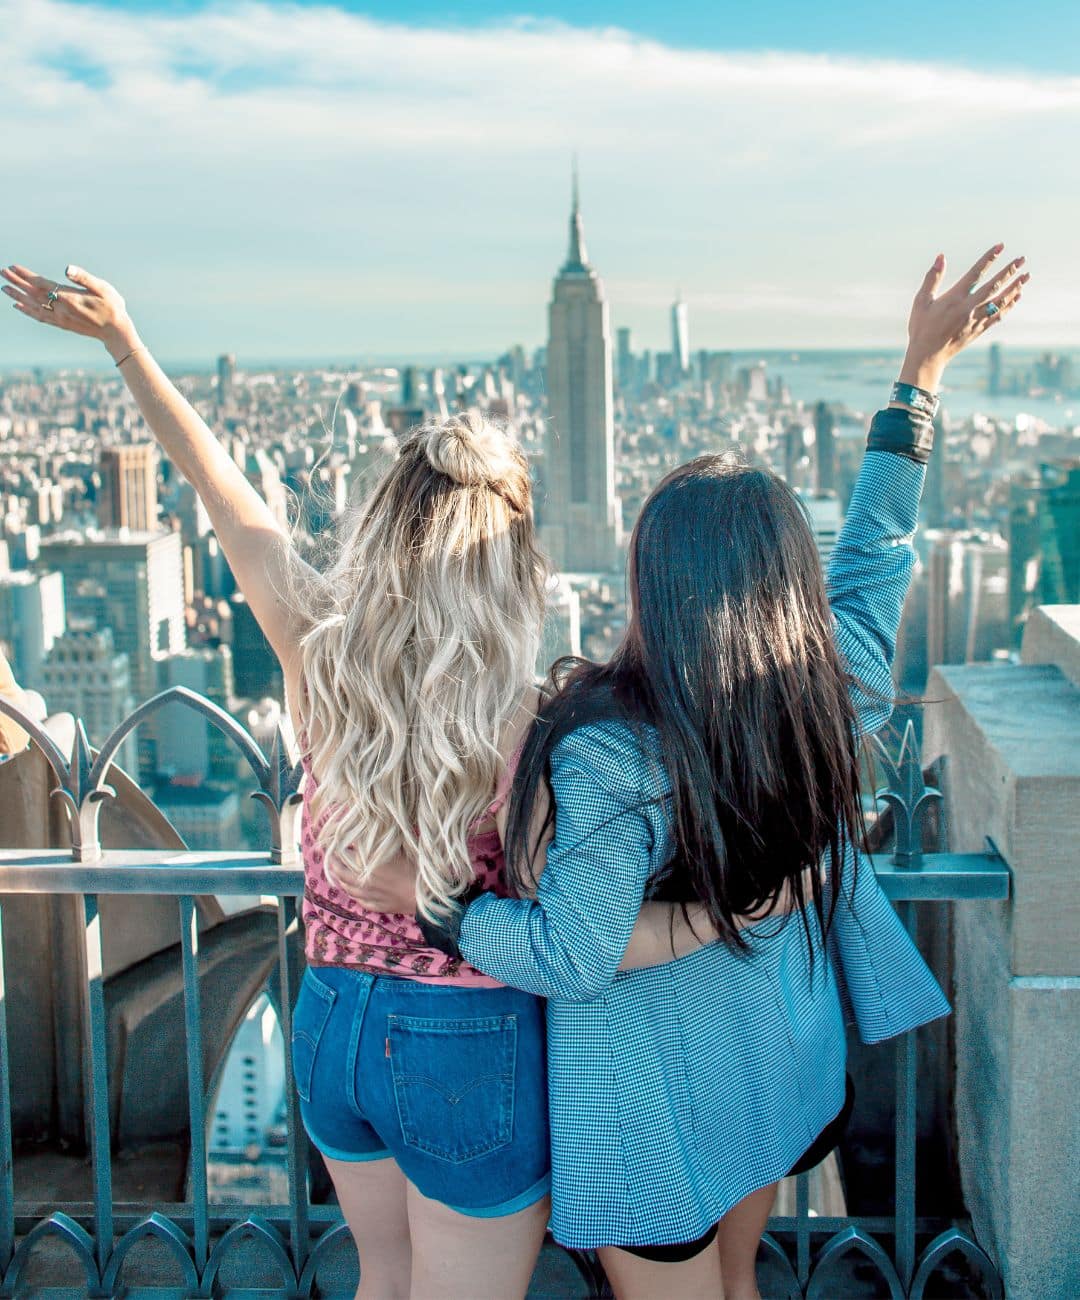 Want to become an au pair and have adventures of a lifetime such as these two girls waving to the world as they make friendships